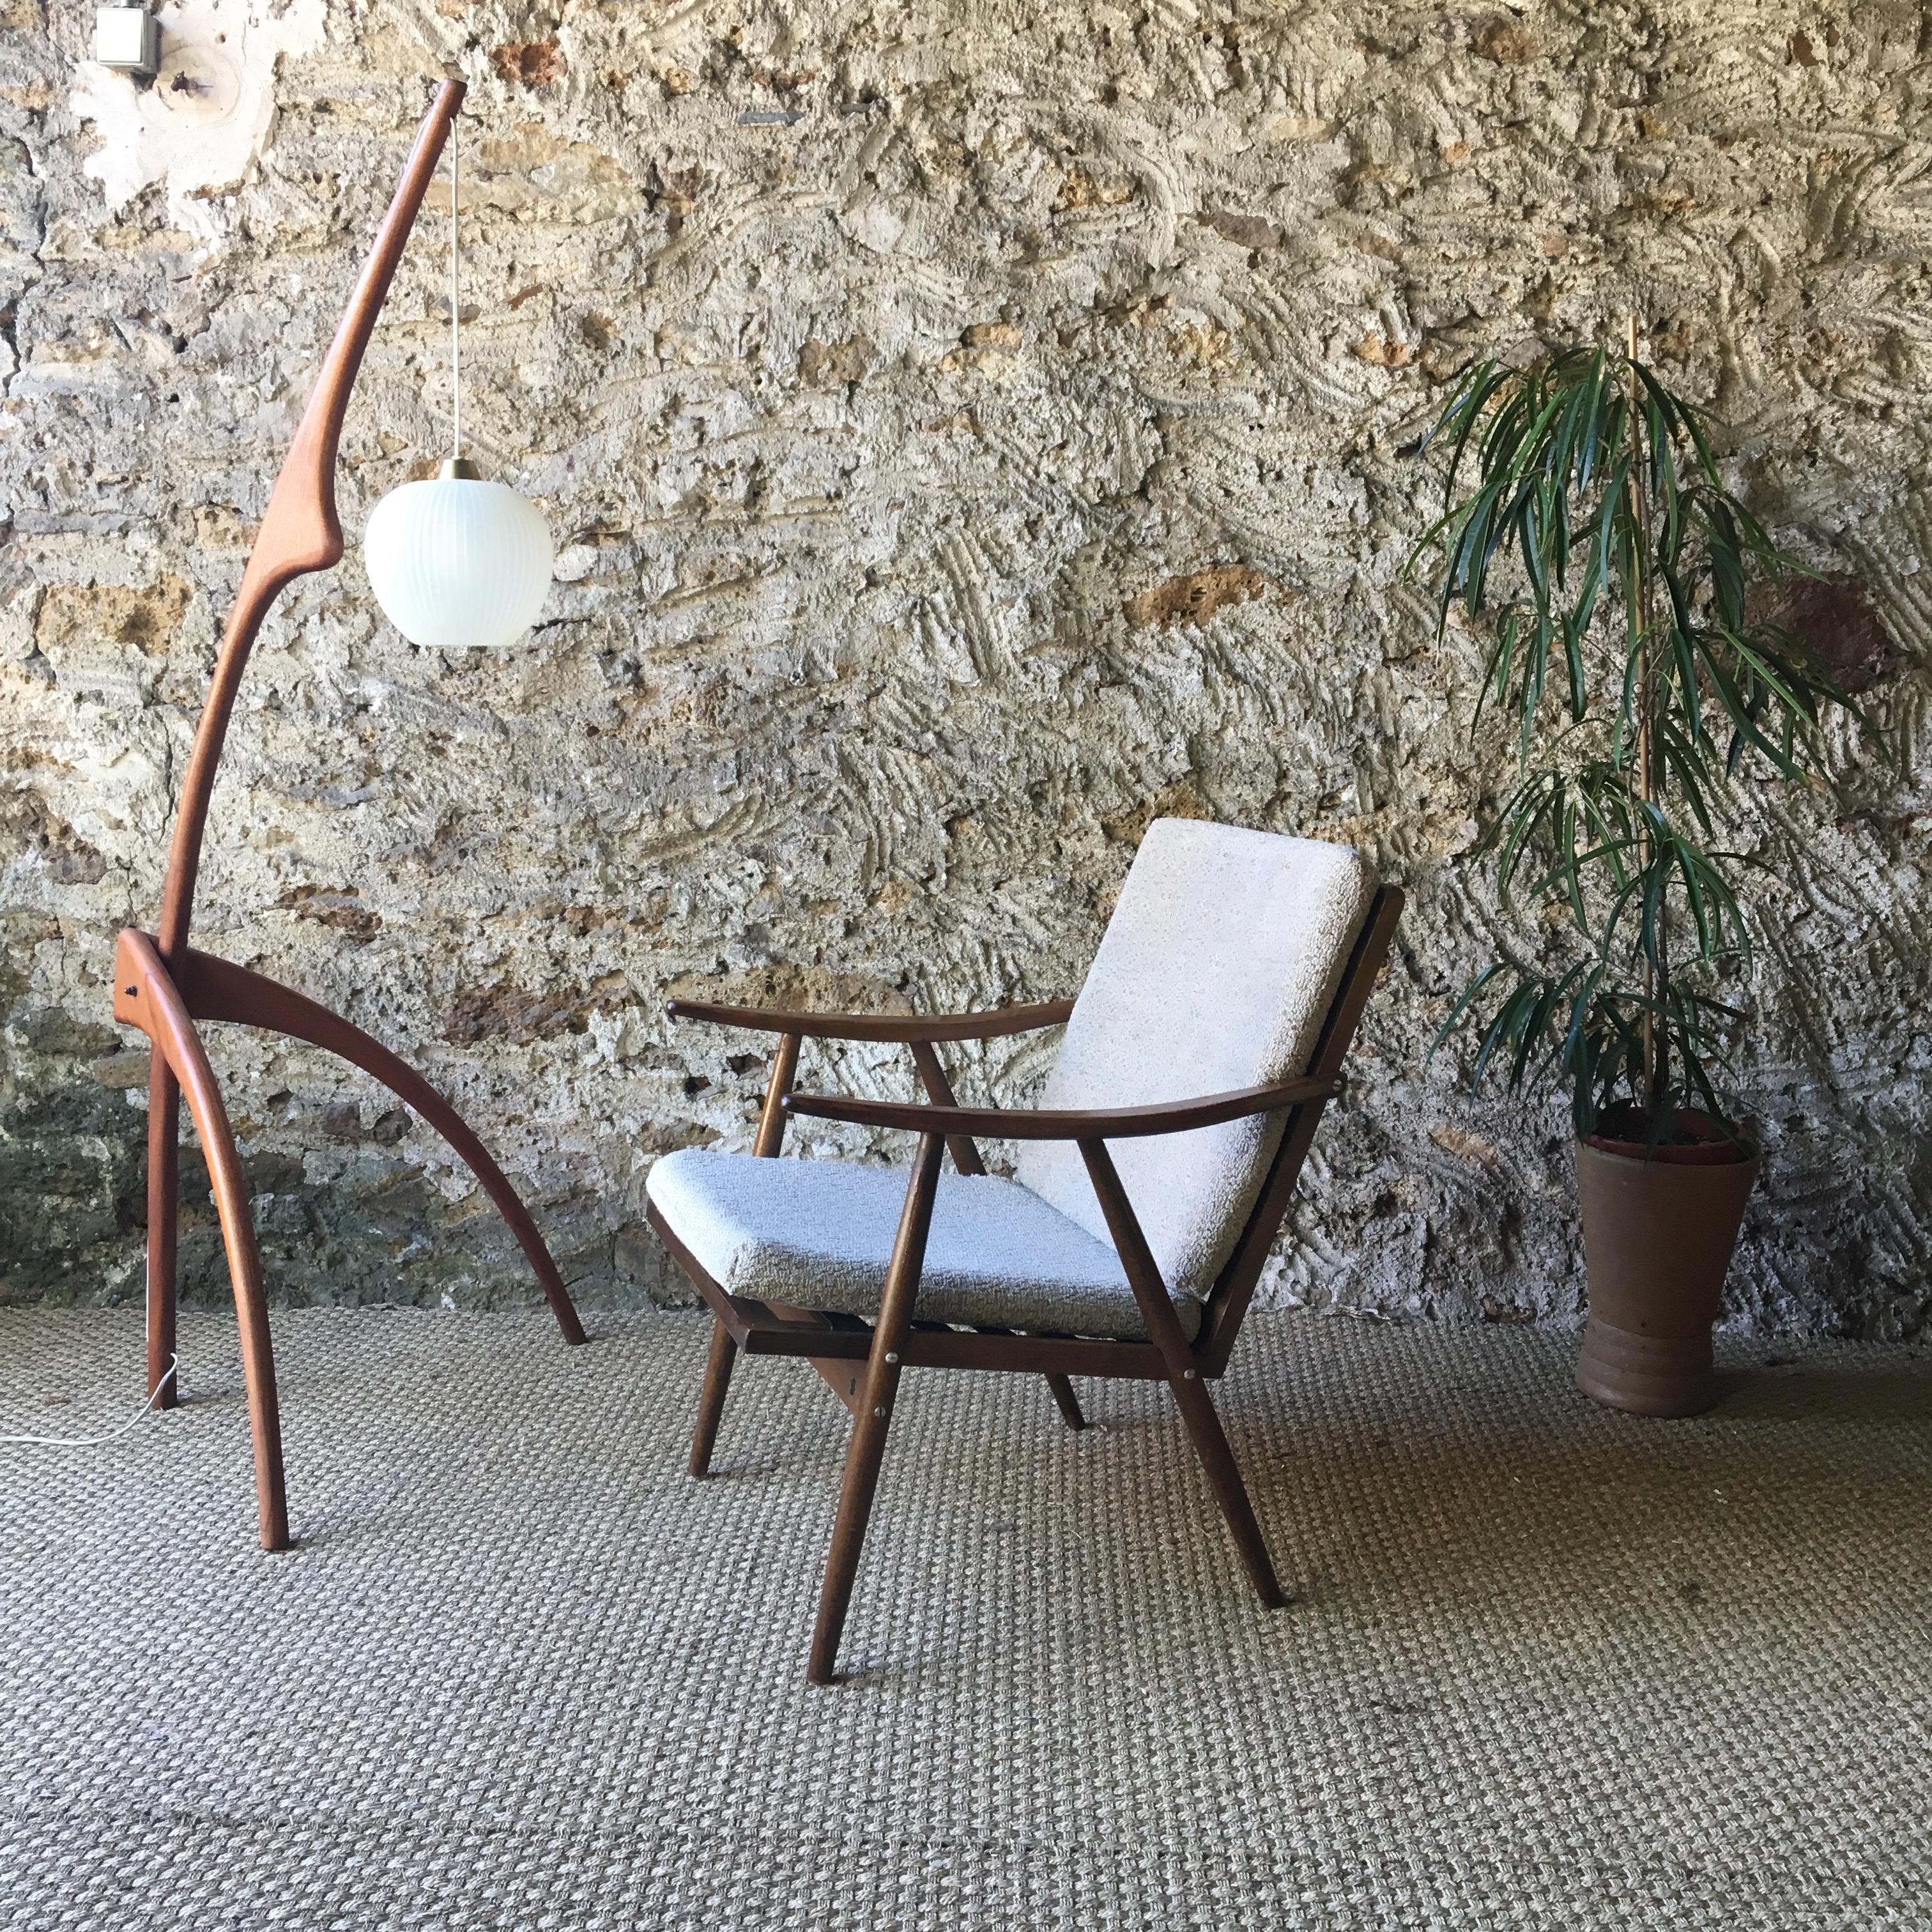 Here is a nice Thonet chair named boomerang. Made in the 1950s.

Aerial design. Beautiful graceful line of armrests.

Light, minimalist design, they fit in any style of decoration.

All is from origin and in good condition. Sand colored